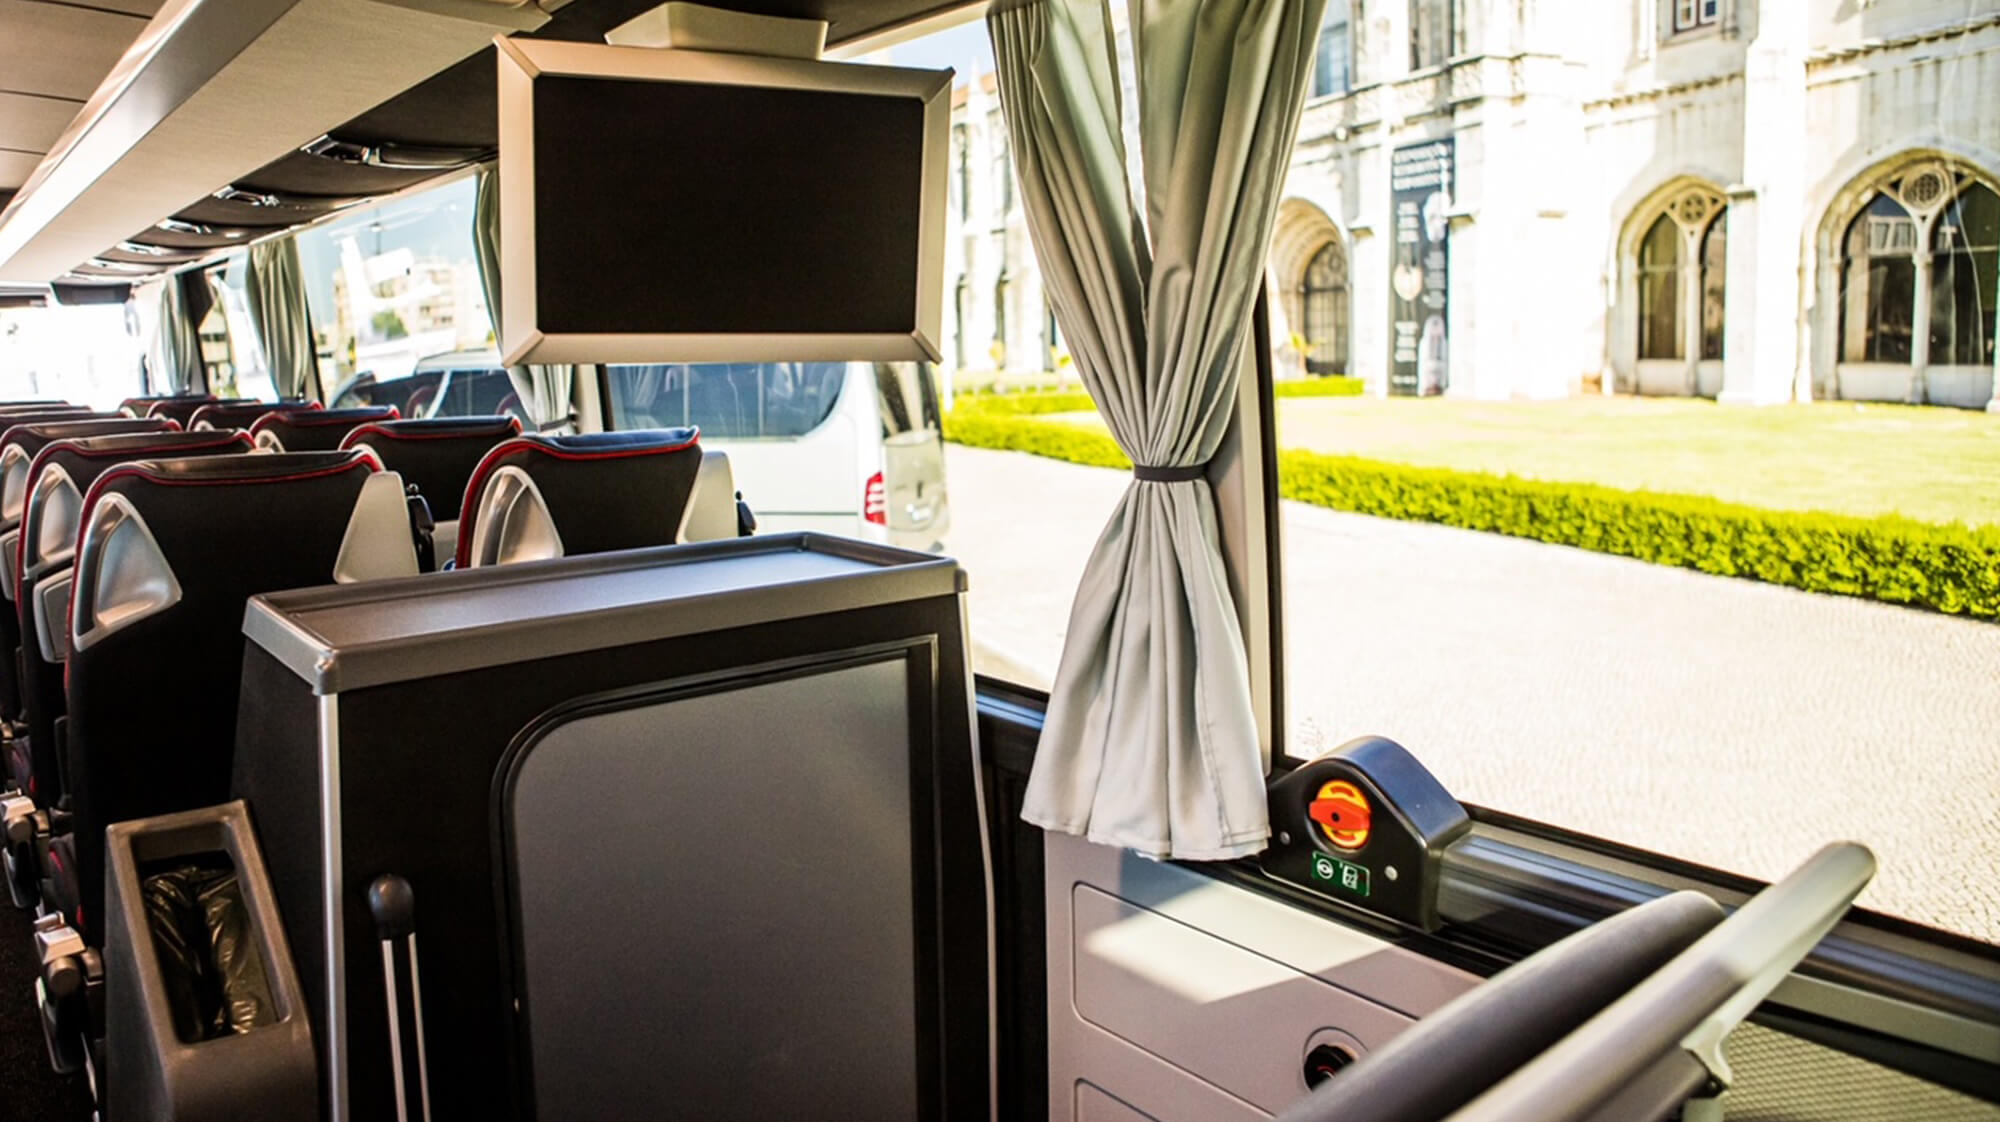 Rent a 53 seater Luxury VIP Coach (Mercedes Benz 2019) from SPECIALIMO TRAVEL GROUP from Almargem do Bispo, Sintra 